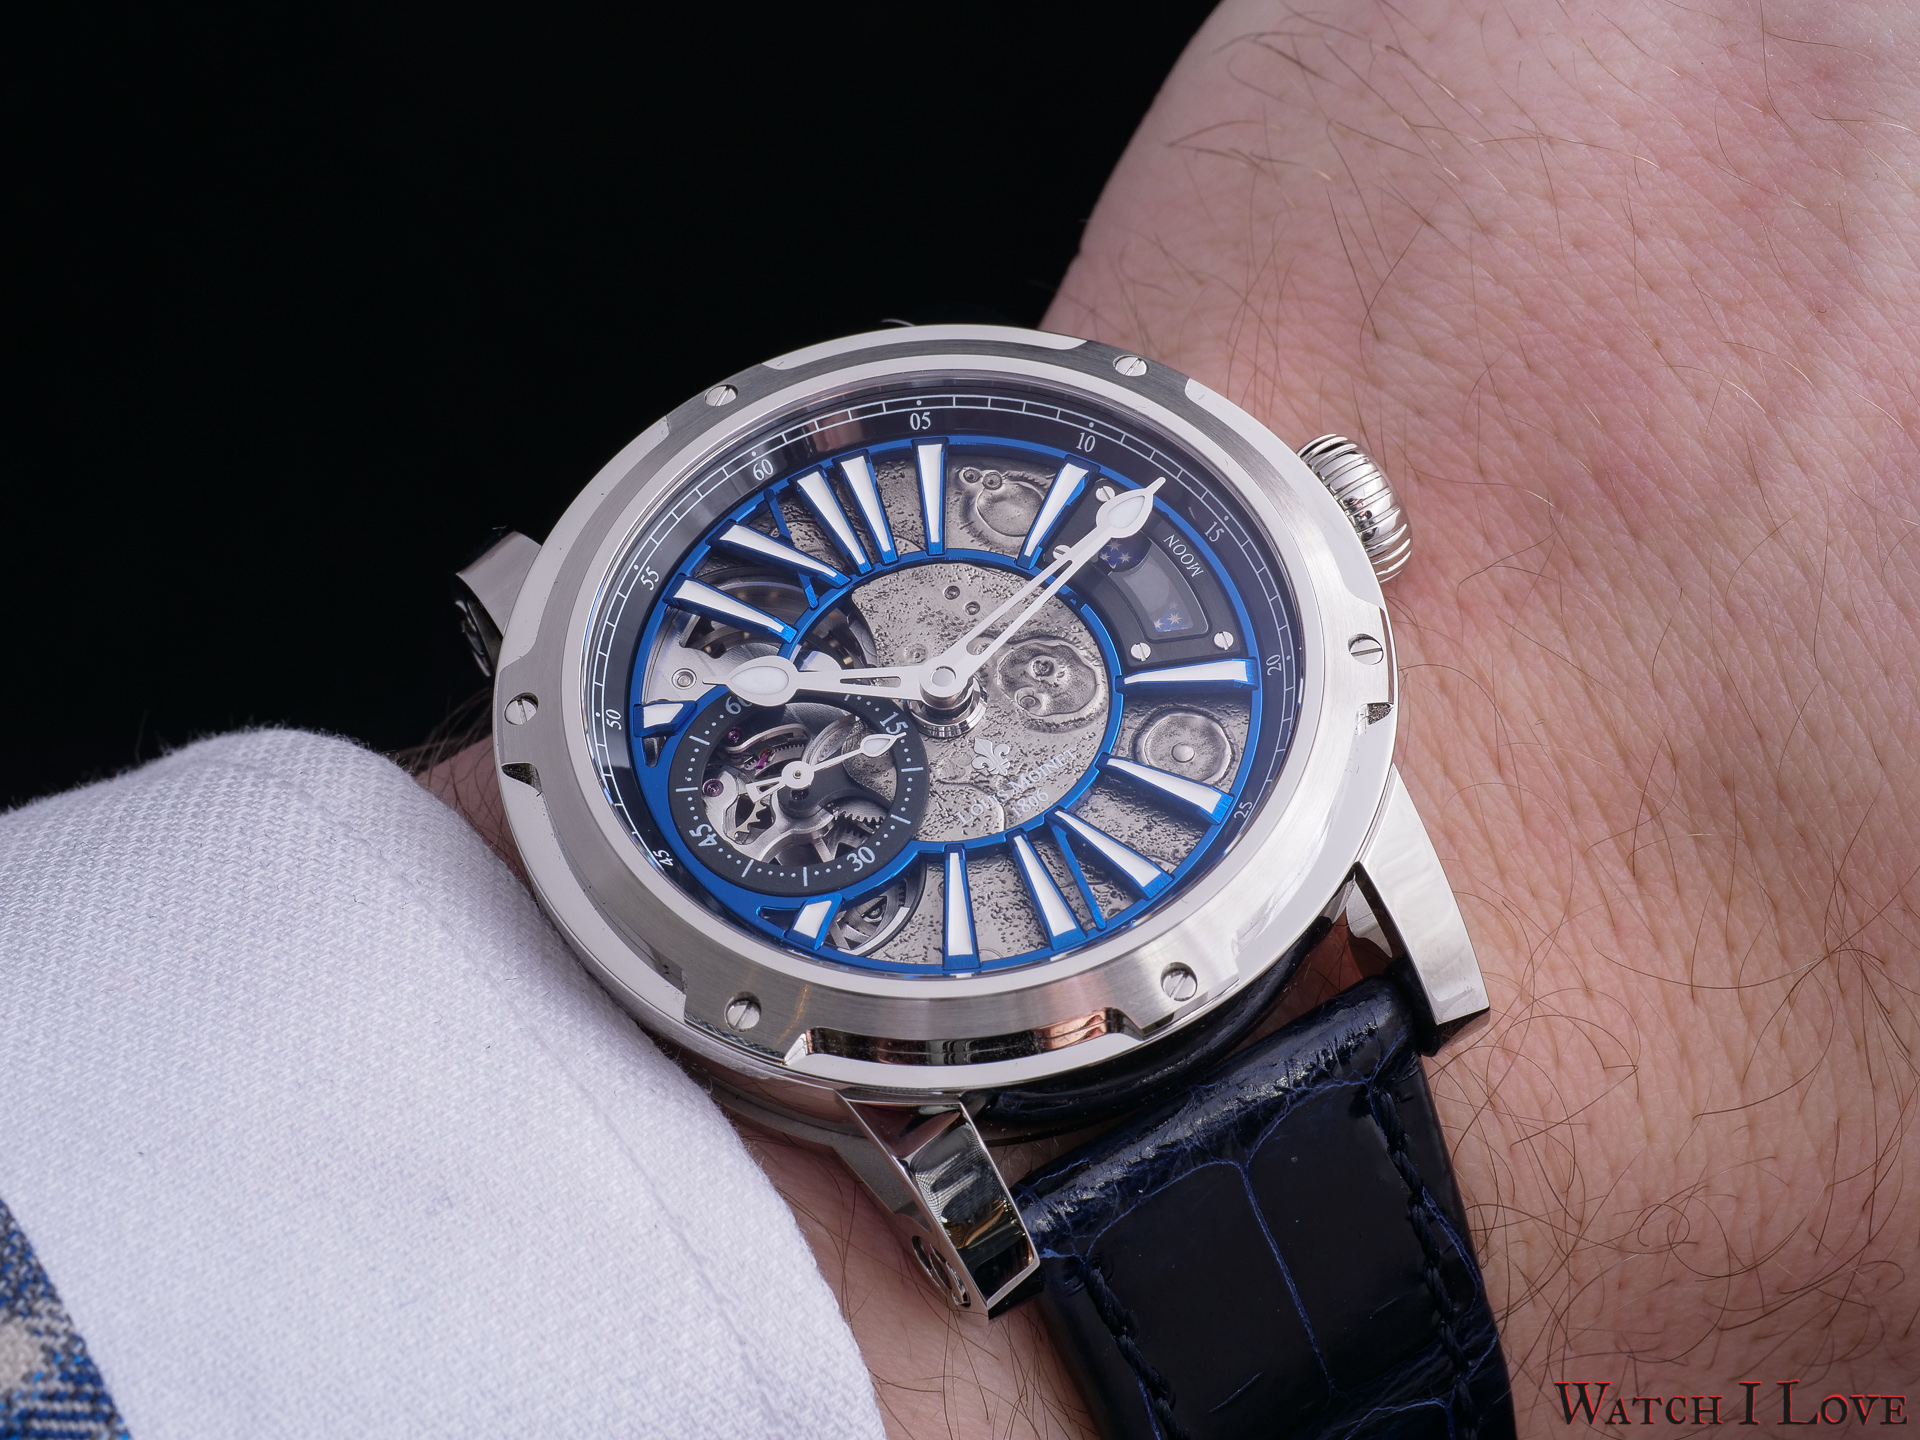 Hands-on Louis Moinet Moon - Dare to Dream - Watch I Love